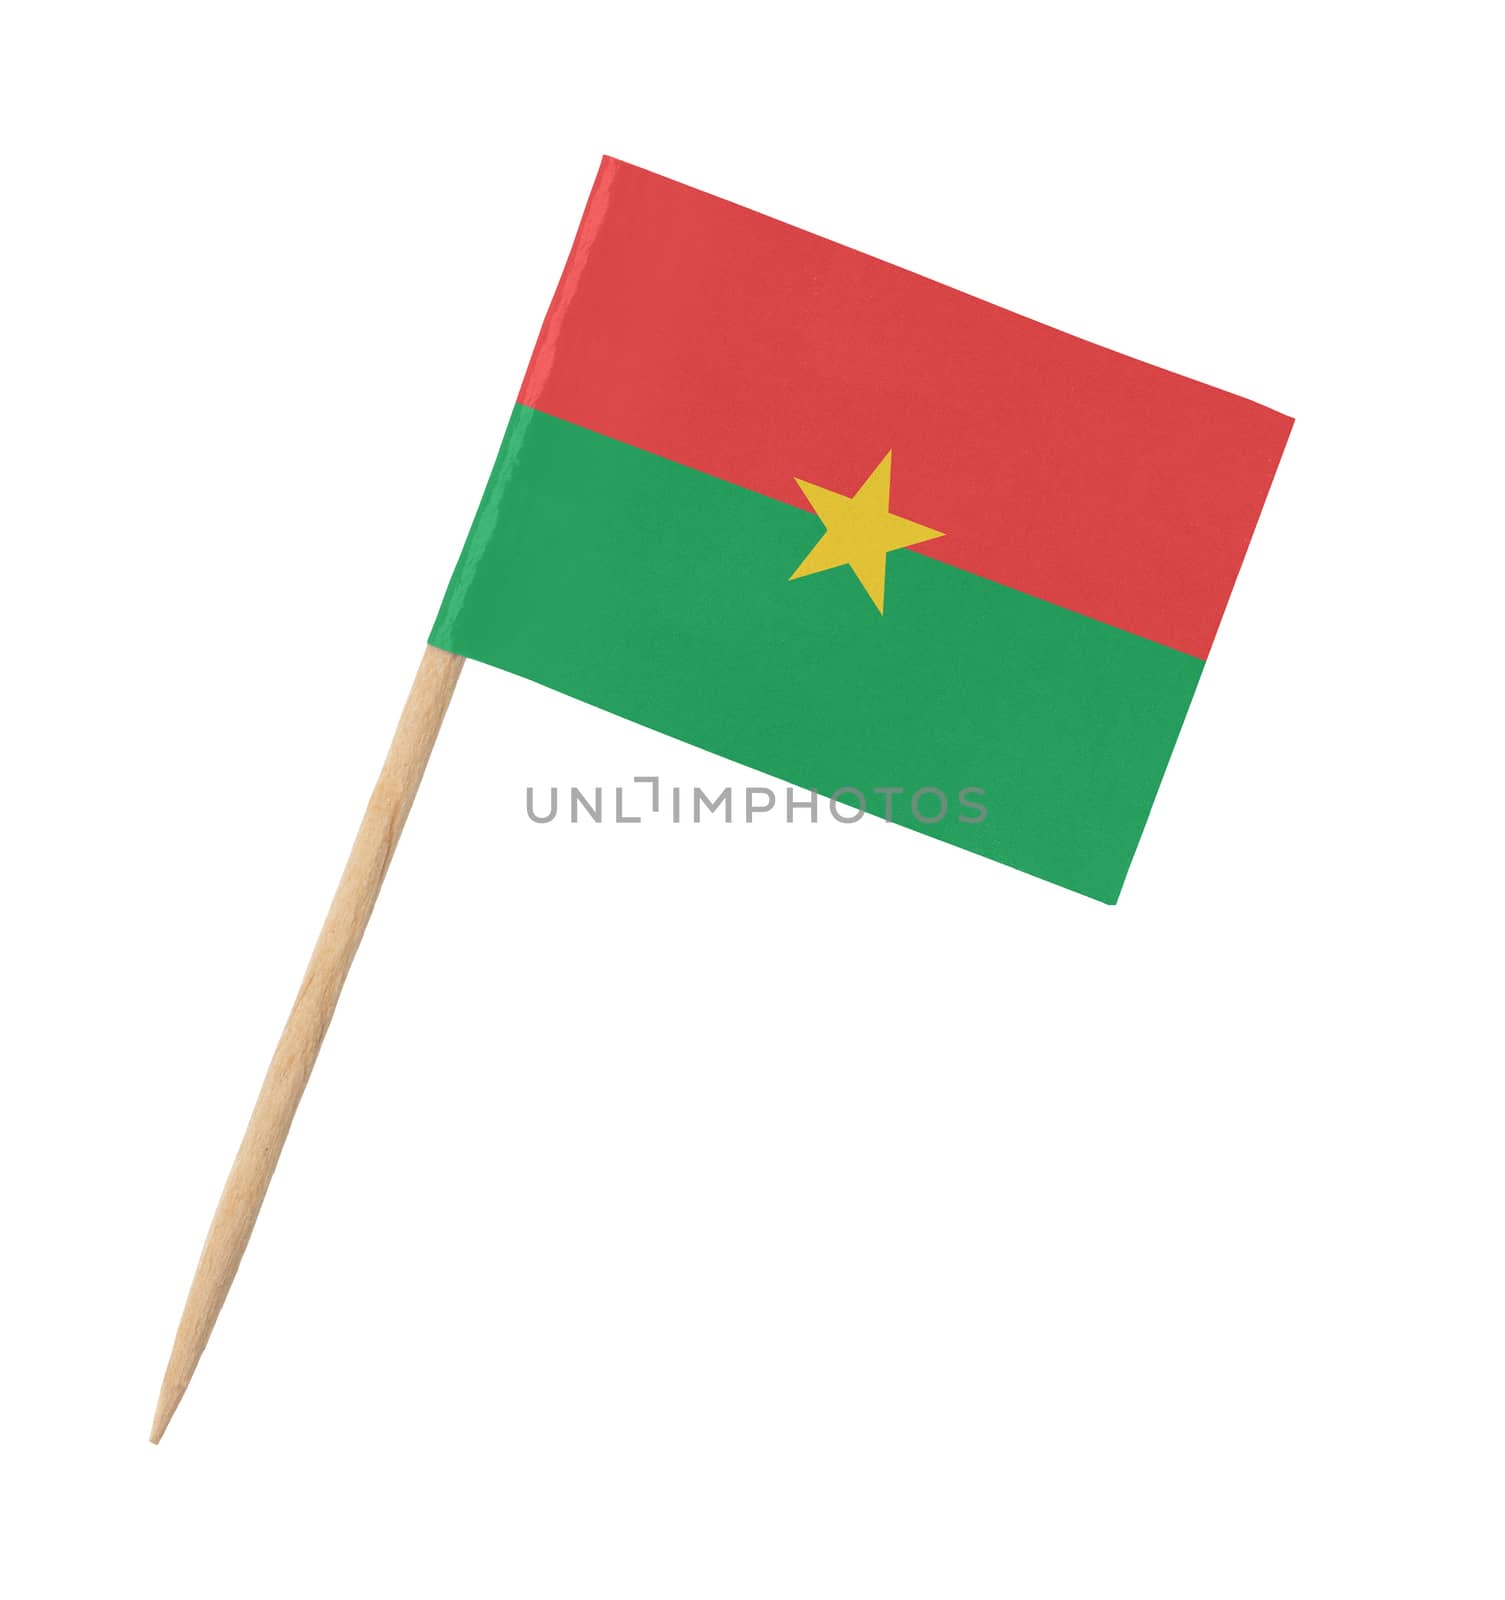 Small paper flag of Burkina Faso on wooden stick, isolated on white